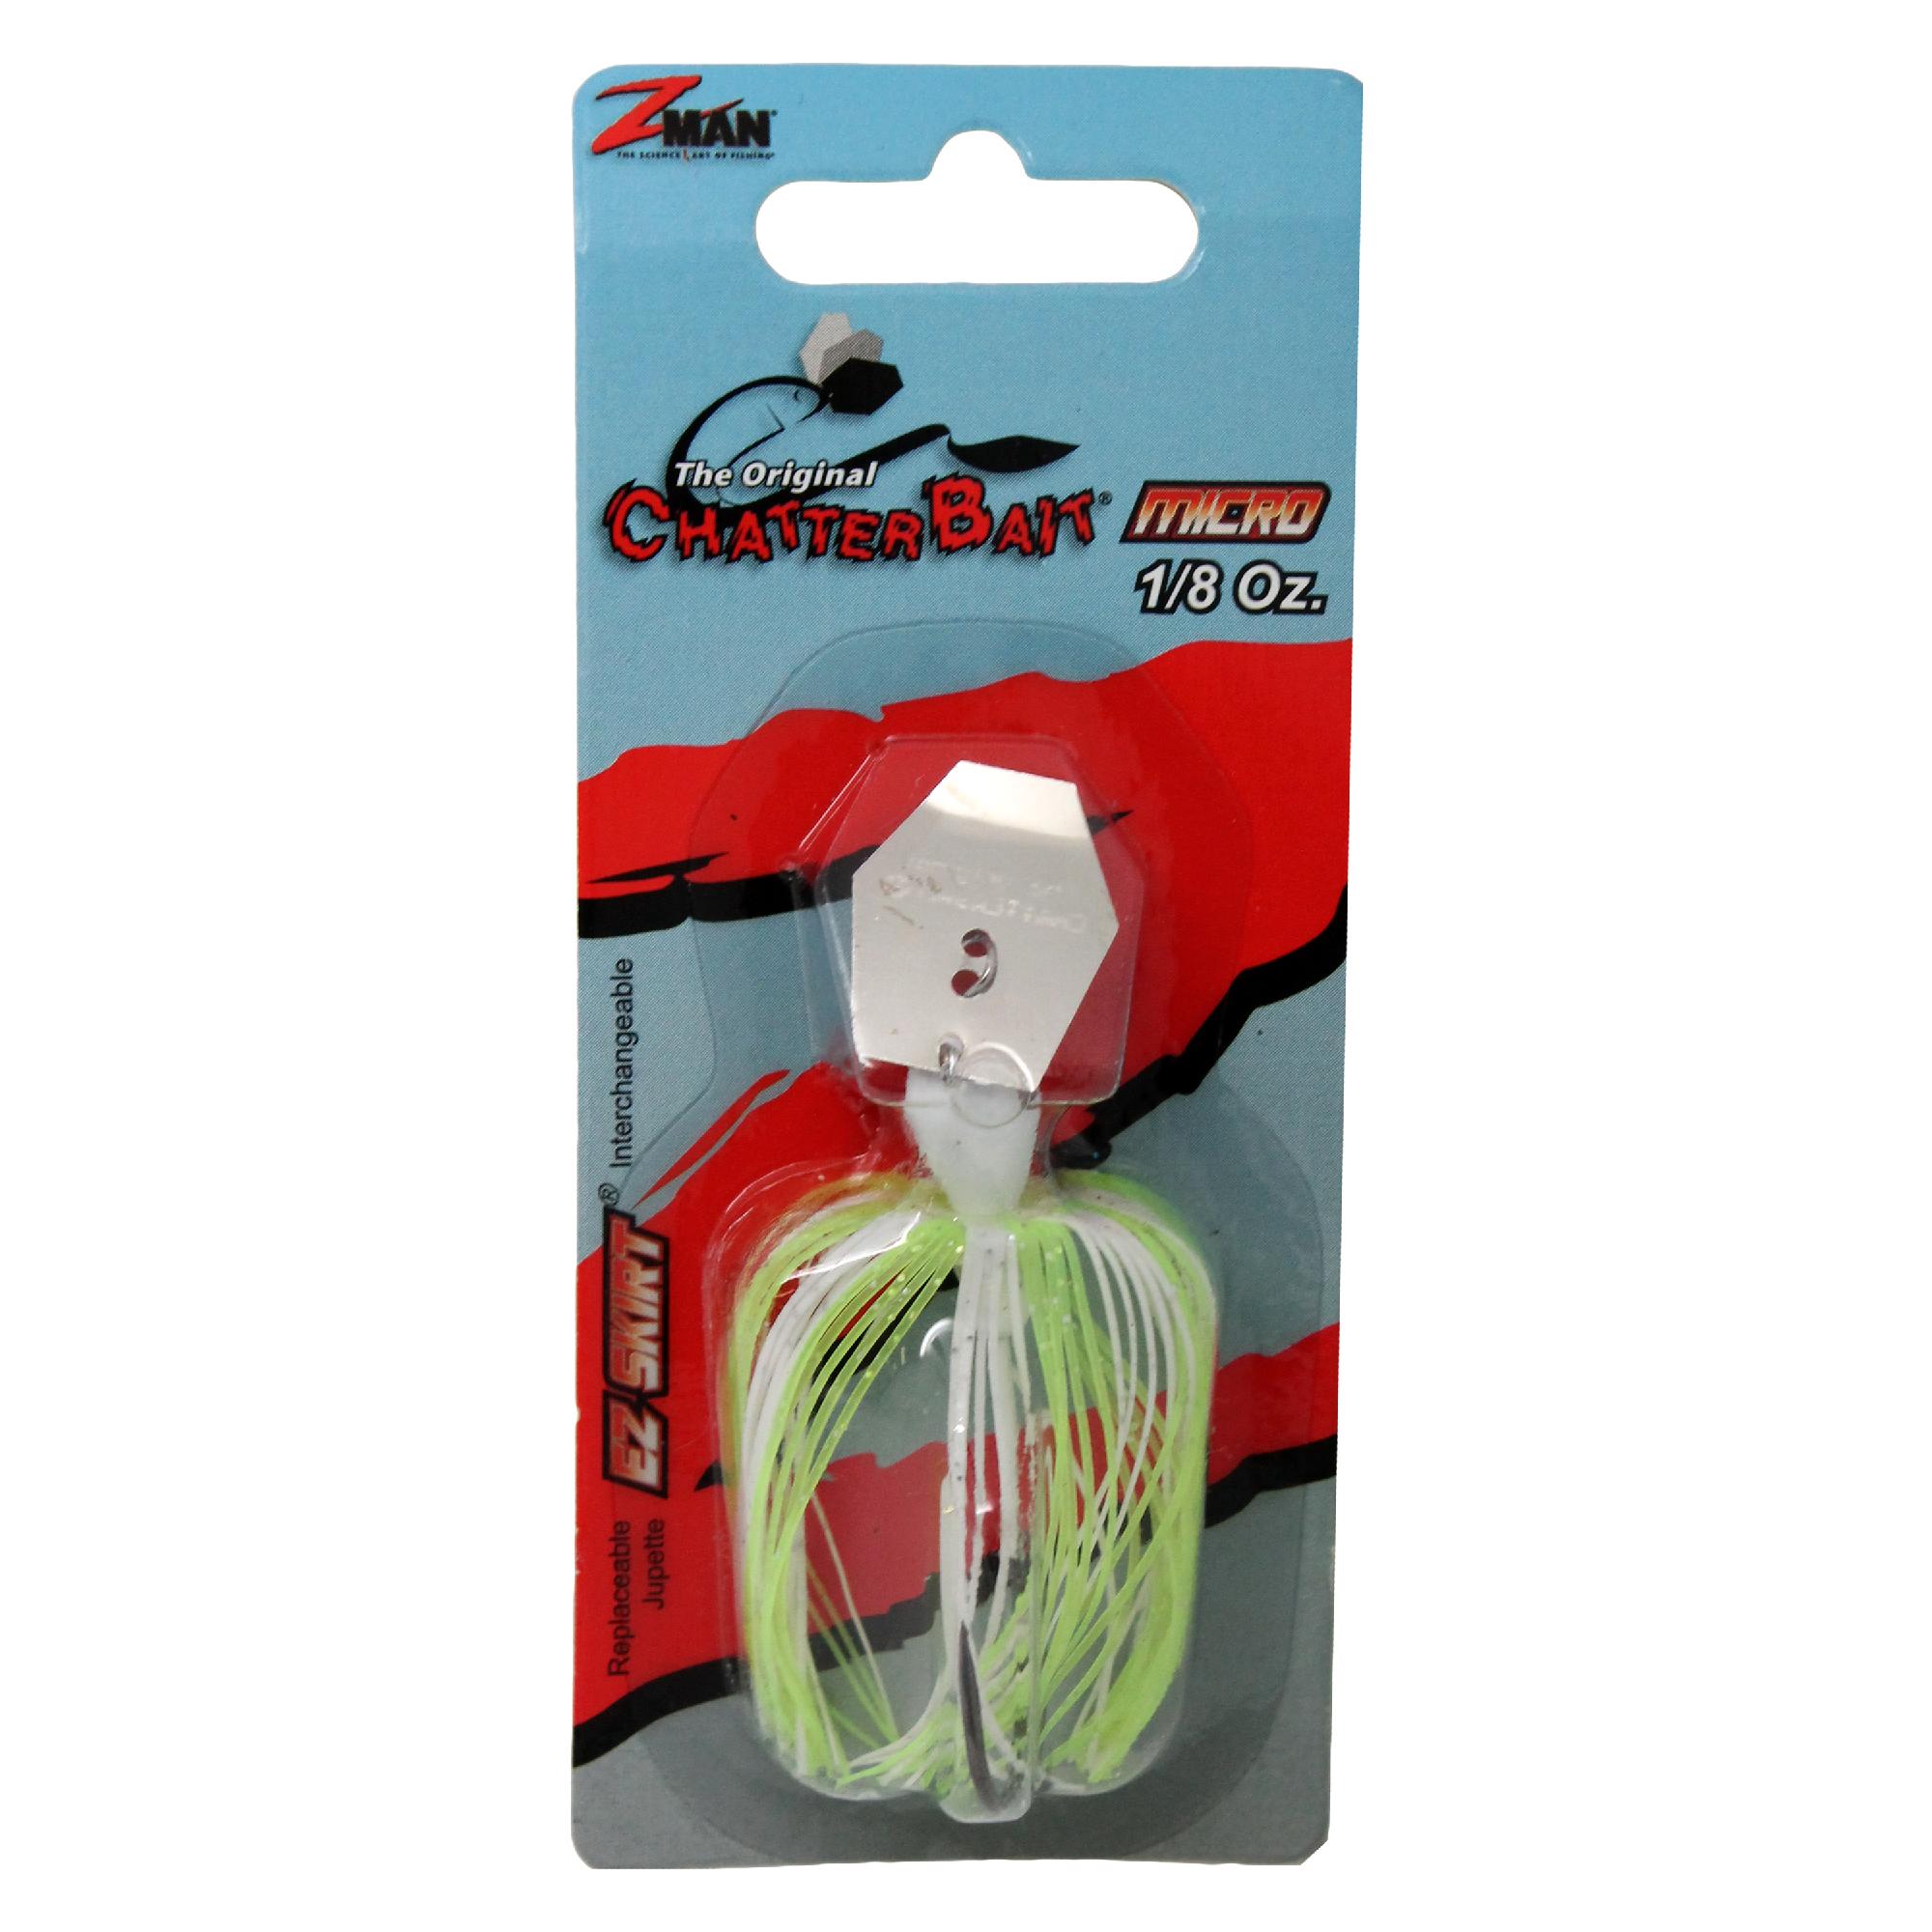 Chatterbait Micro Lures 3″ Length 1 8 Oz Weight Chartreuse White Per 1